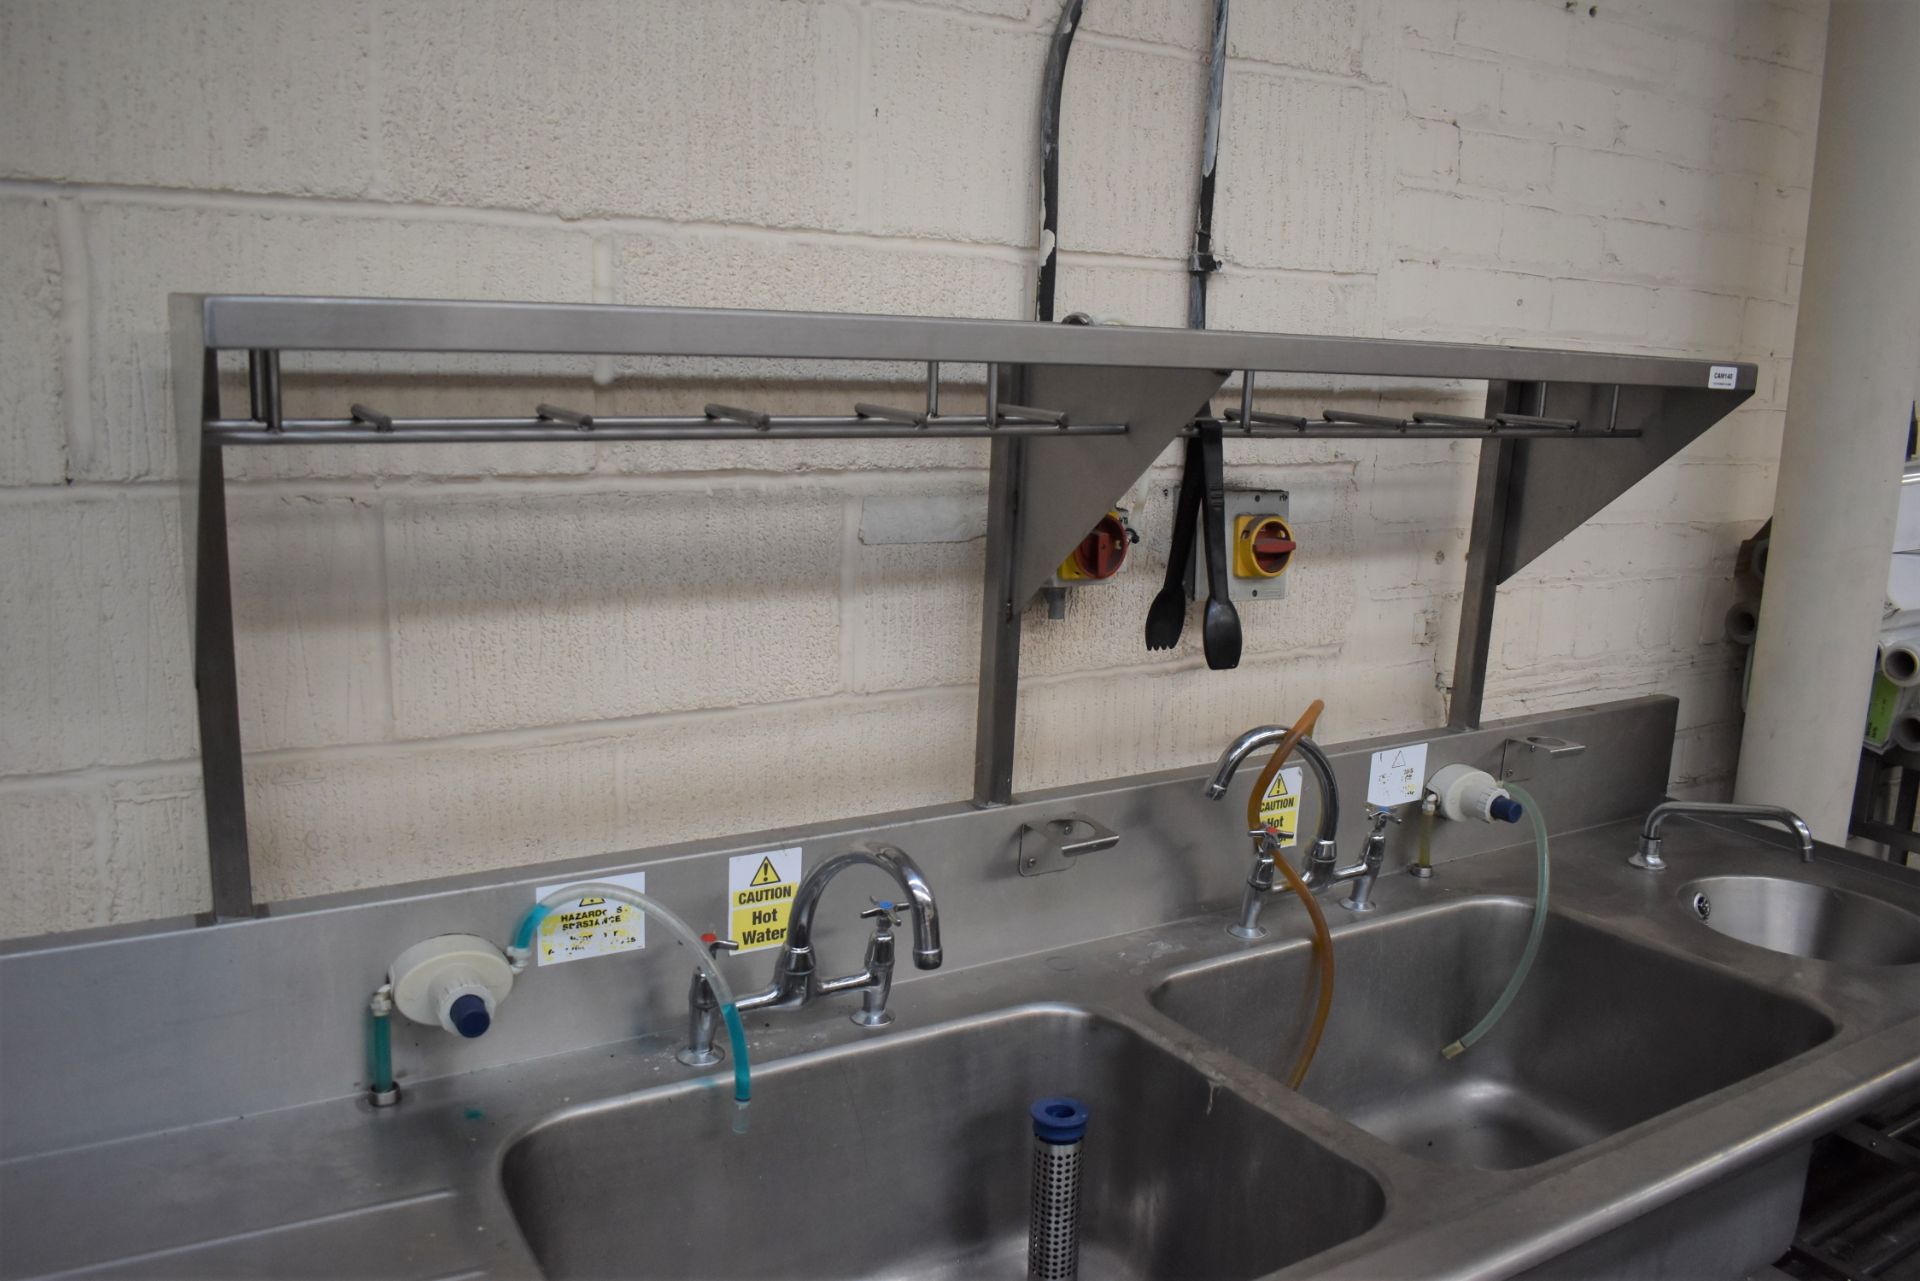 1 x Stainless Steel Commercial Wash Basin Unit With Twin Sink Bowl, Mixer Taps, Undershelf, Upstands - Image 4 of 8